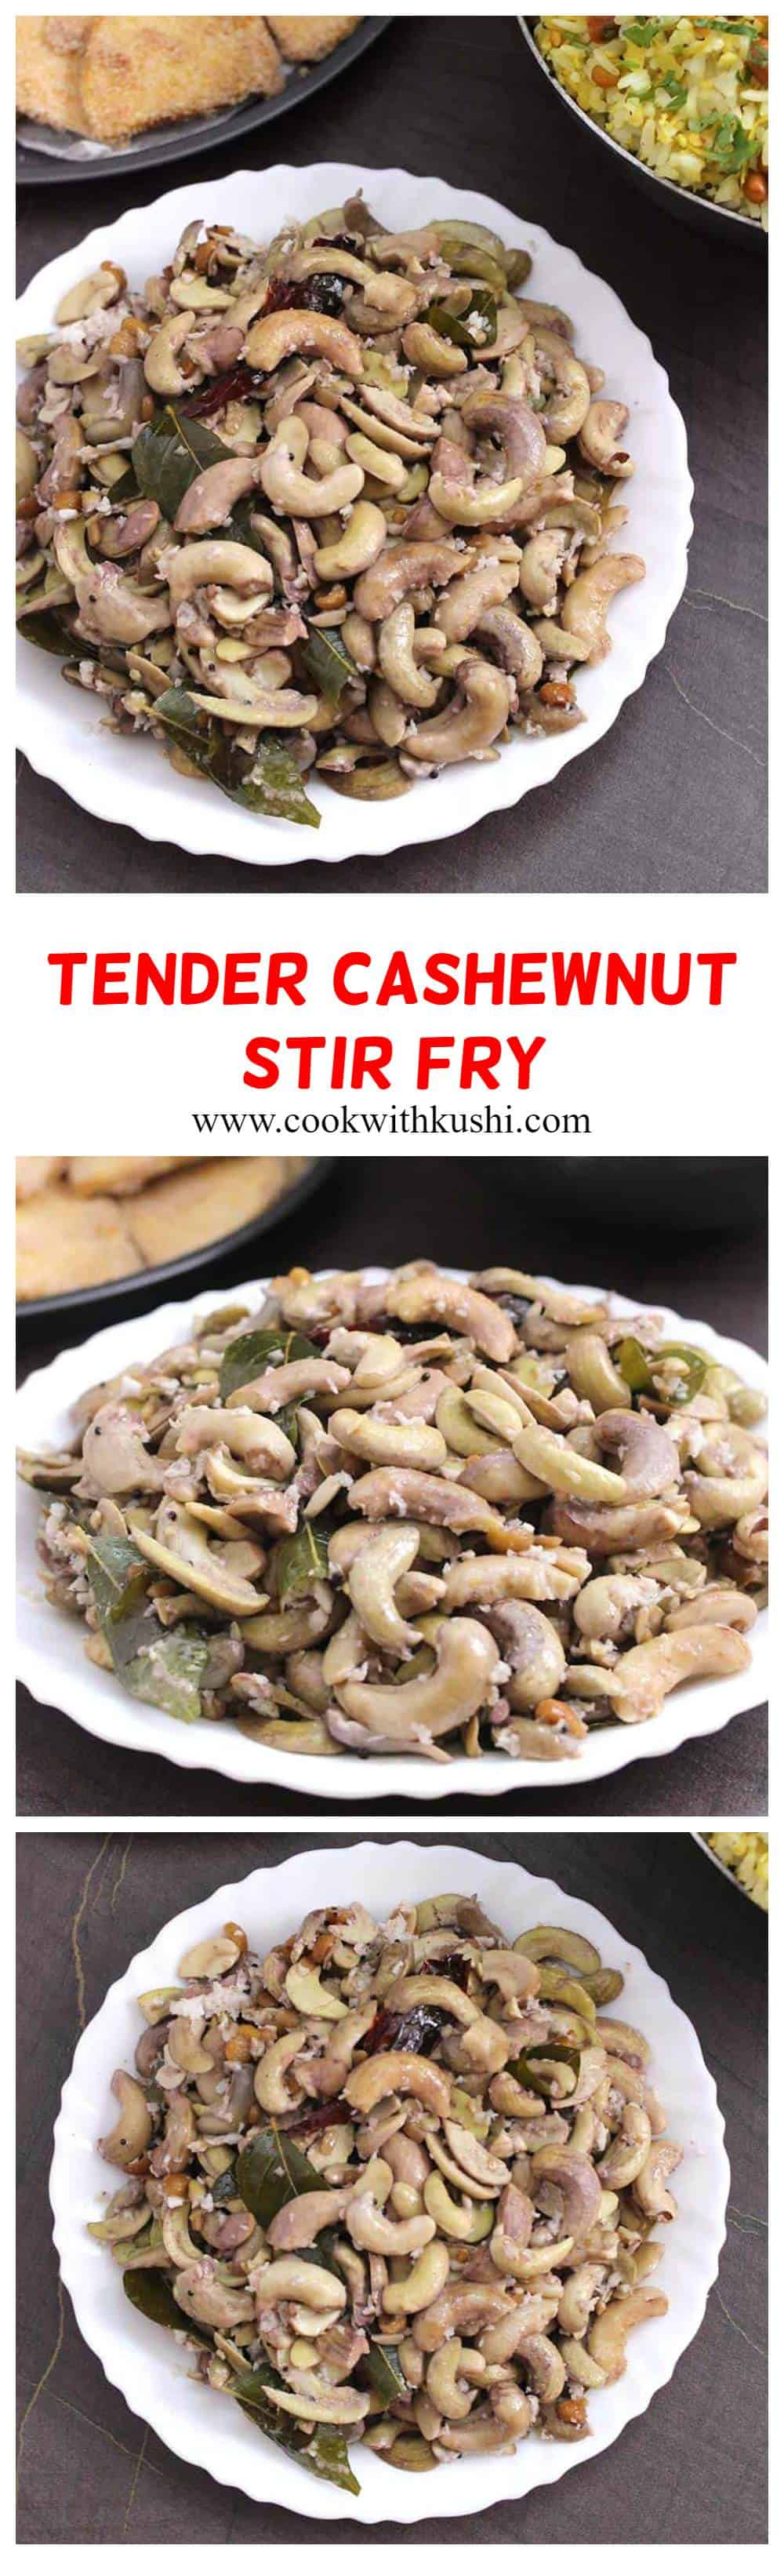 Tender Cashewnut Stir Fry | Bibbe Upkari is a flavorful and delicious, soft and creamy stir fry prepared using fresh cashews and few spices. This  can be served as side dish with steamed rice or as a breakfast or evening snack with poori (puri), chapati. #tendercashewnuts #Bibbo #stirfry #cashews #cashewrecipes #vegtarianmeal #veganbreakfast #veganfood #dinnerrecipes #dinnersides #indianfestival #indianrecipes #Mnagalore #udupi #seasonalrecipes #konkanirecipes #southindianfood #ugadirecipes